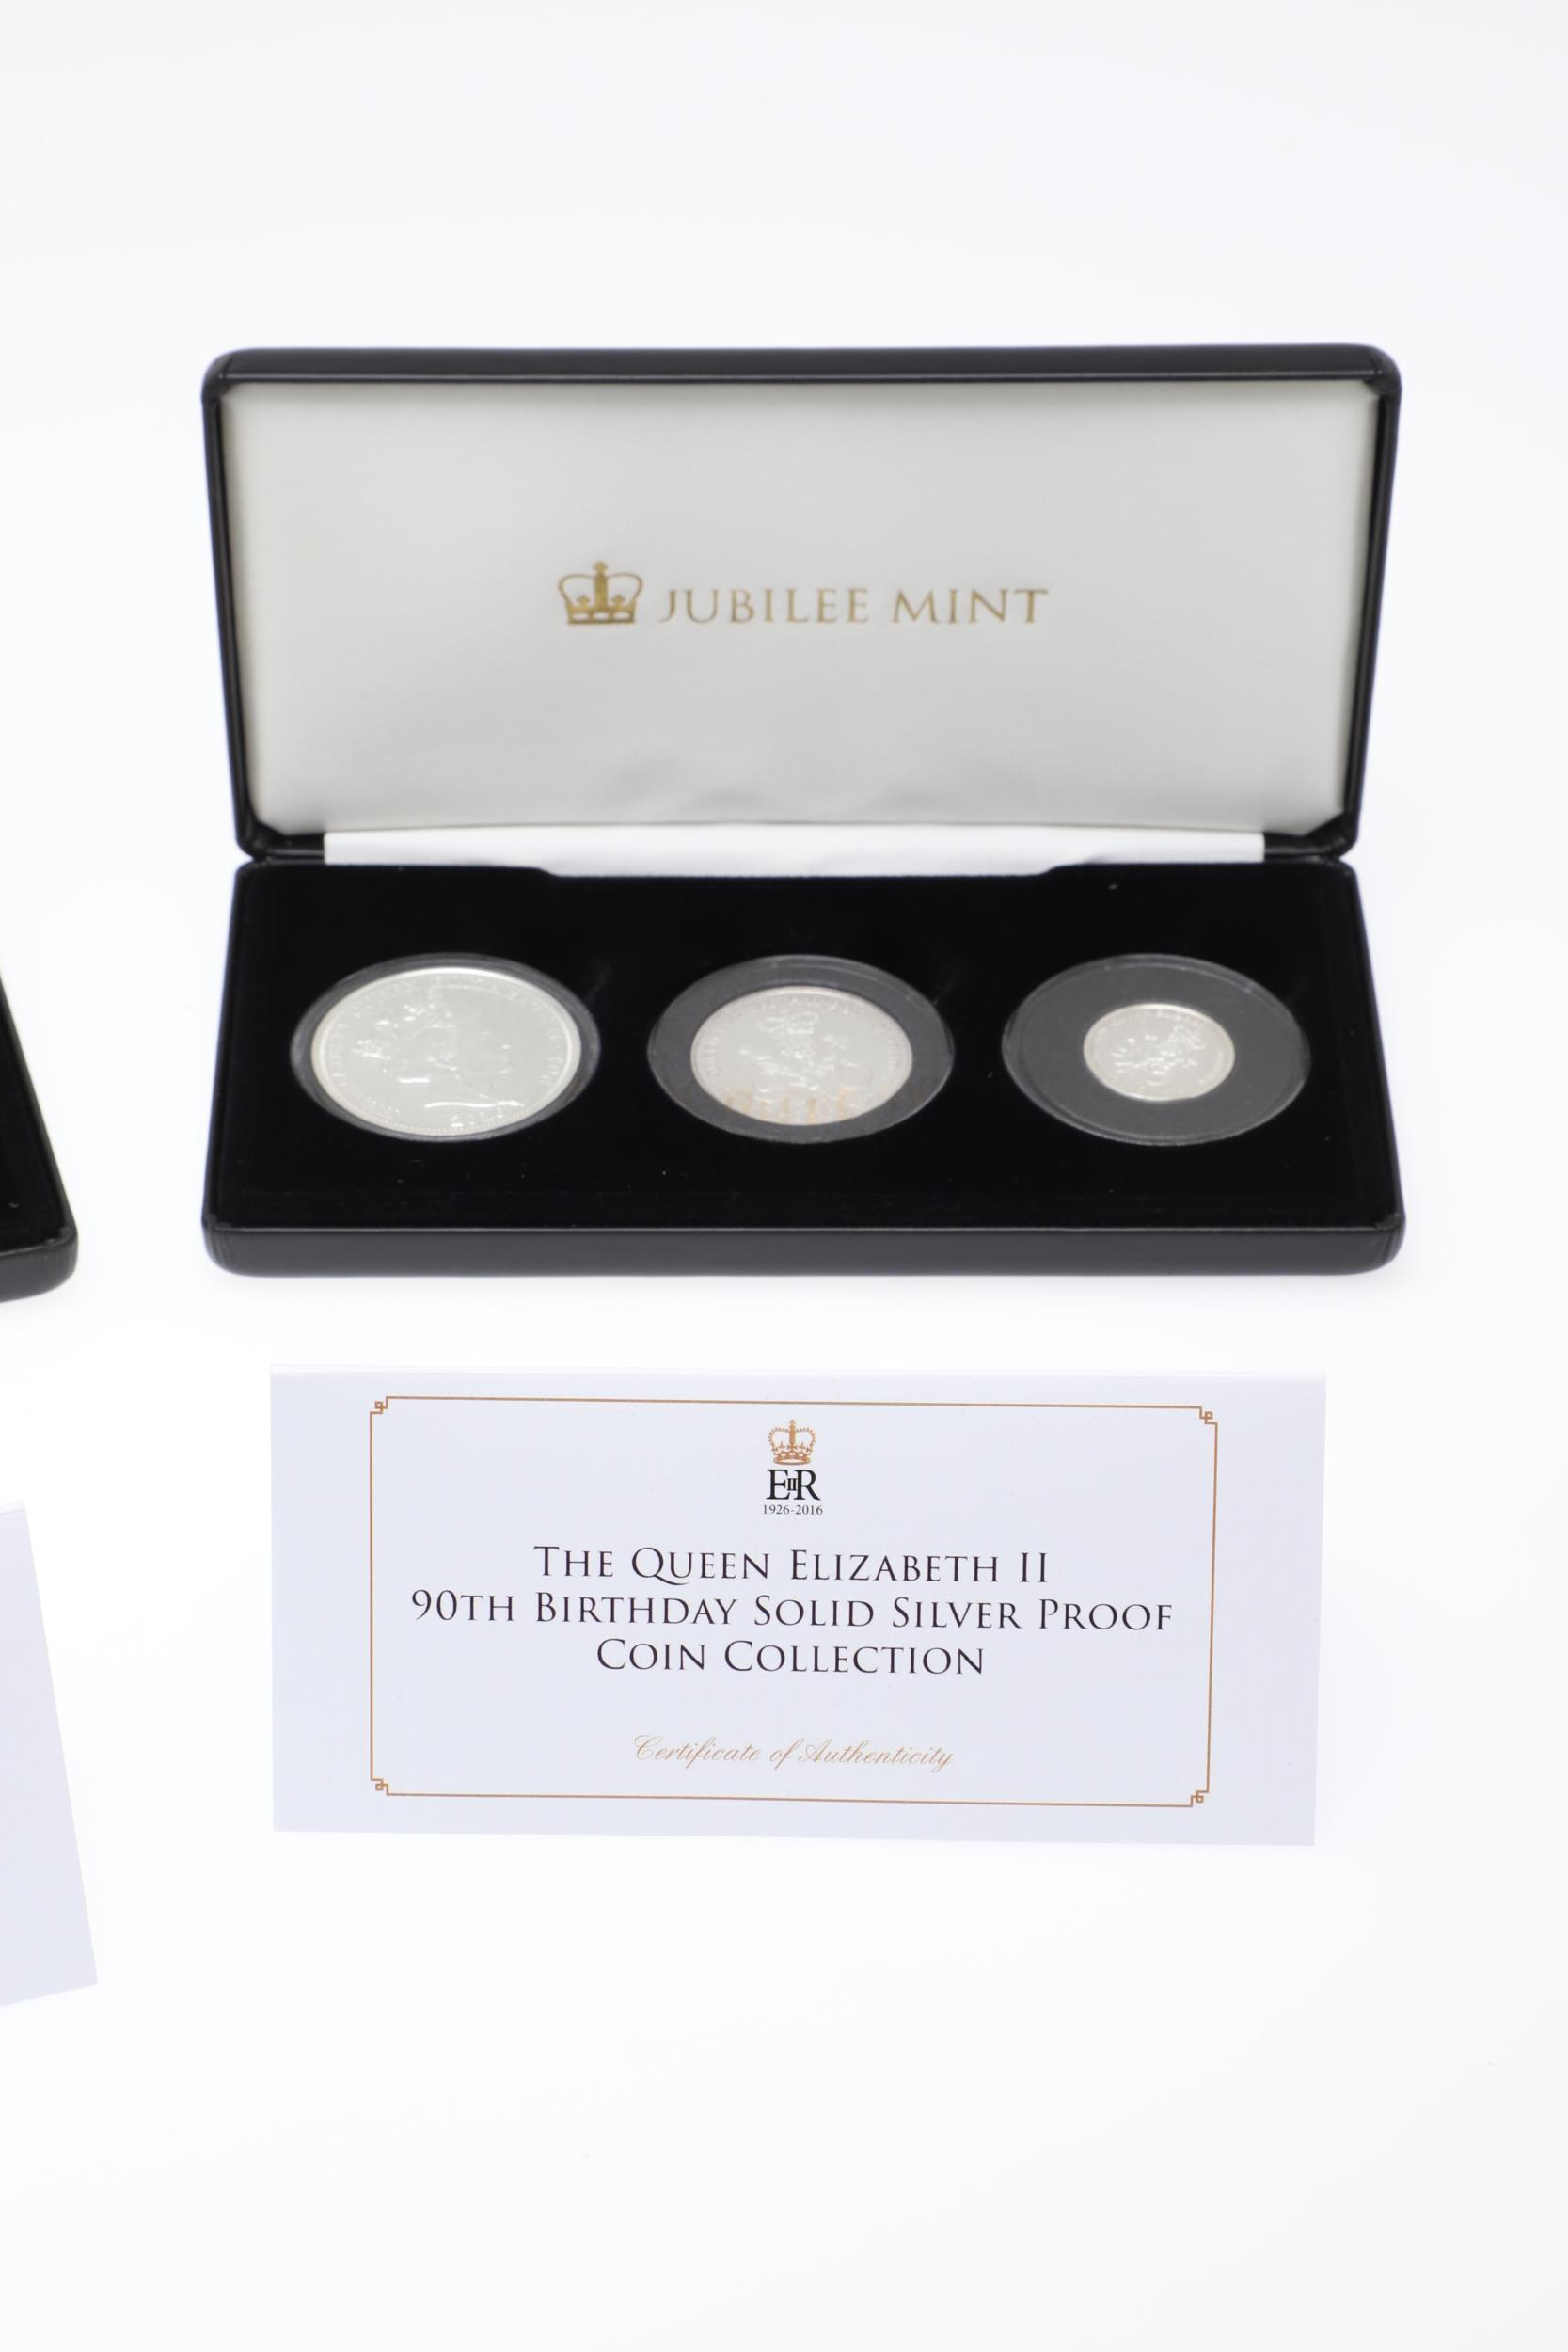 THREE JUBILEE MINT THREE COIN SILVER PROOF ROYALTY THEMED ISSUES, 2014, 2016 AND 2018. - Image 8 of 10